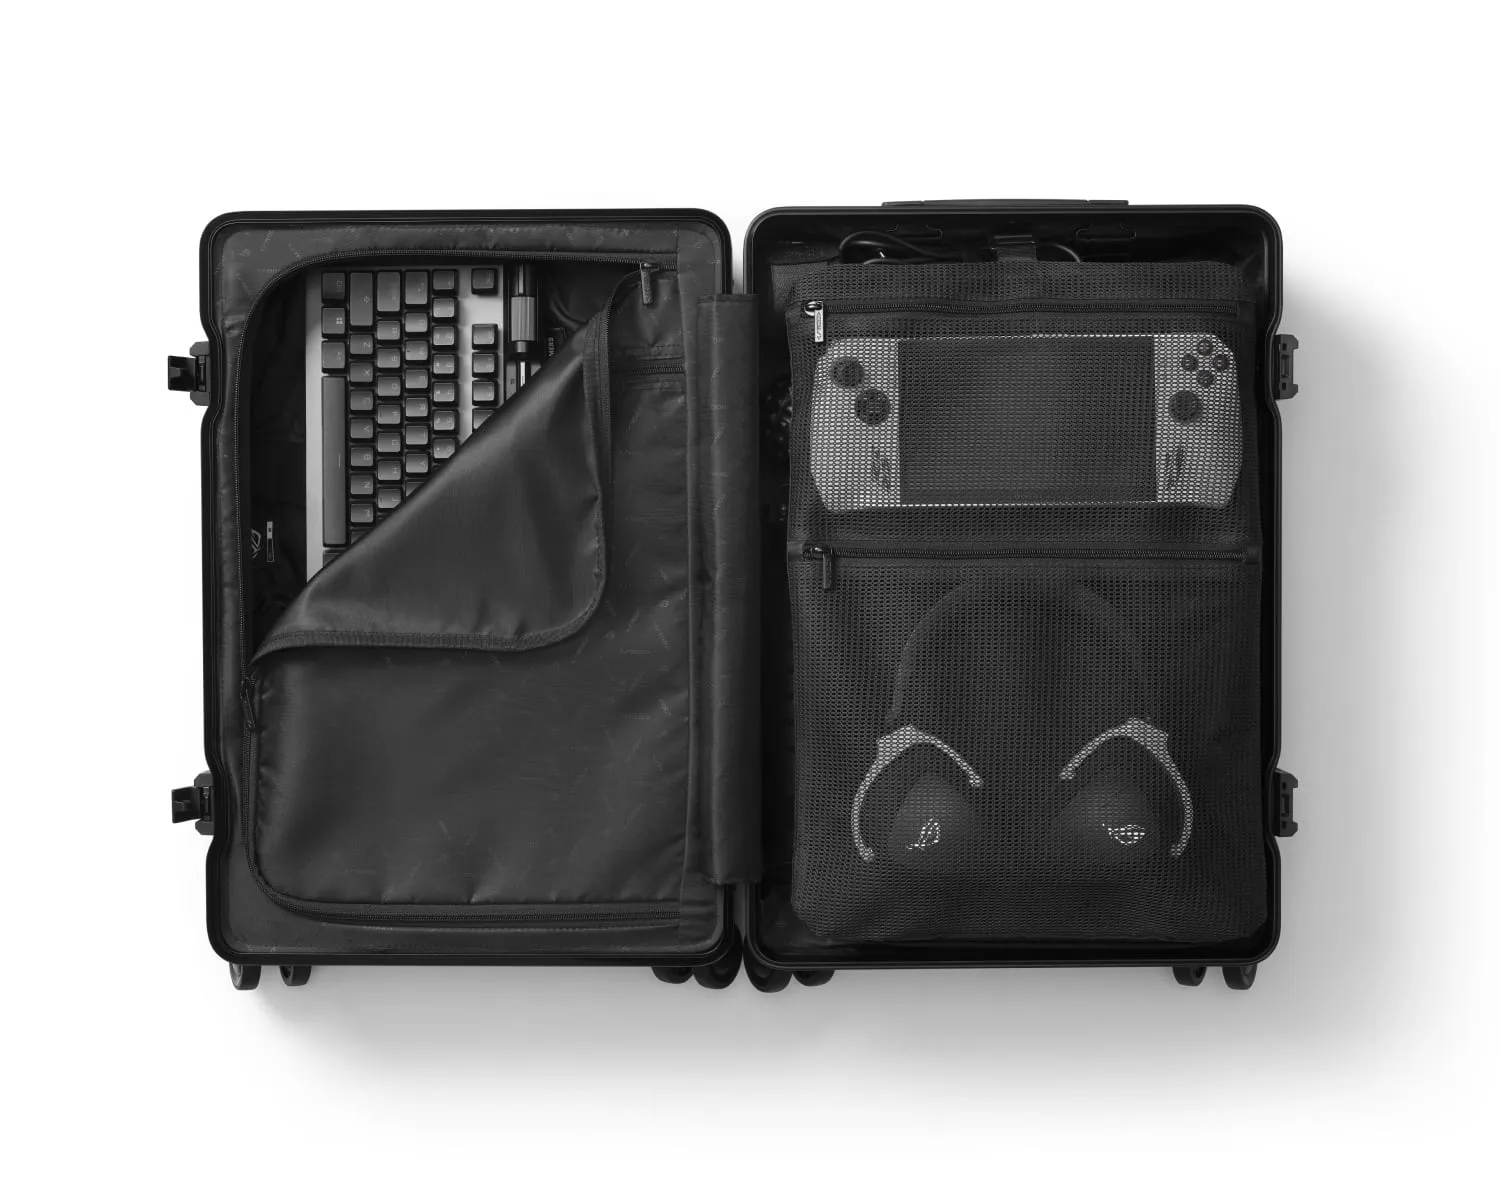 View of the ROG SLASH Hard Case Luggage opened, with keyboard, headphones and ROG Ally visible inside